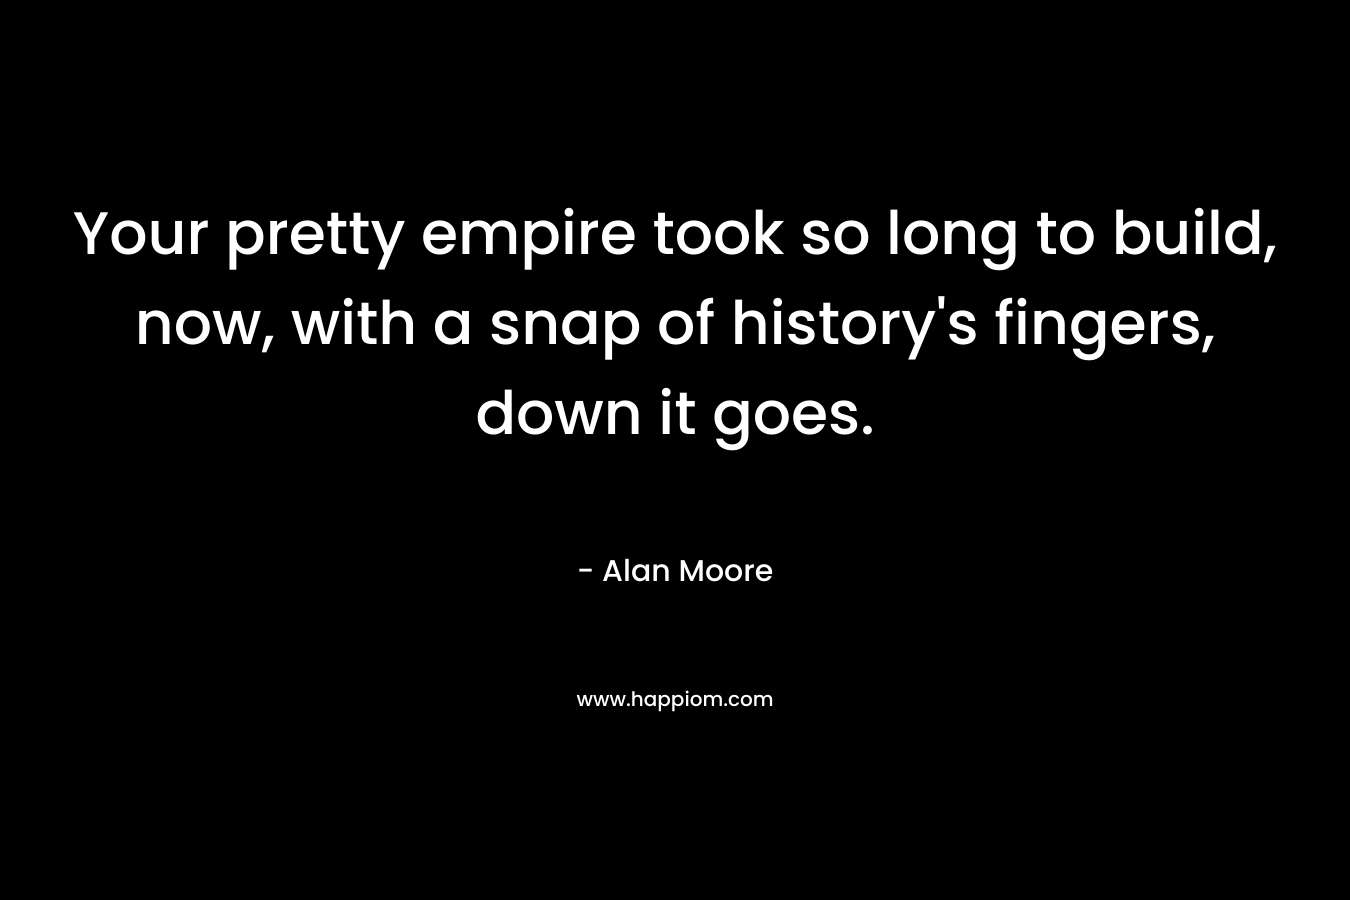 Your pretty empire took so long to build, now, with a snap of history’s fingers, down it goes. – Alan Moore